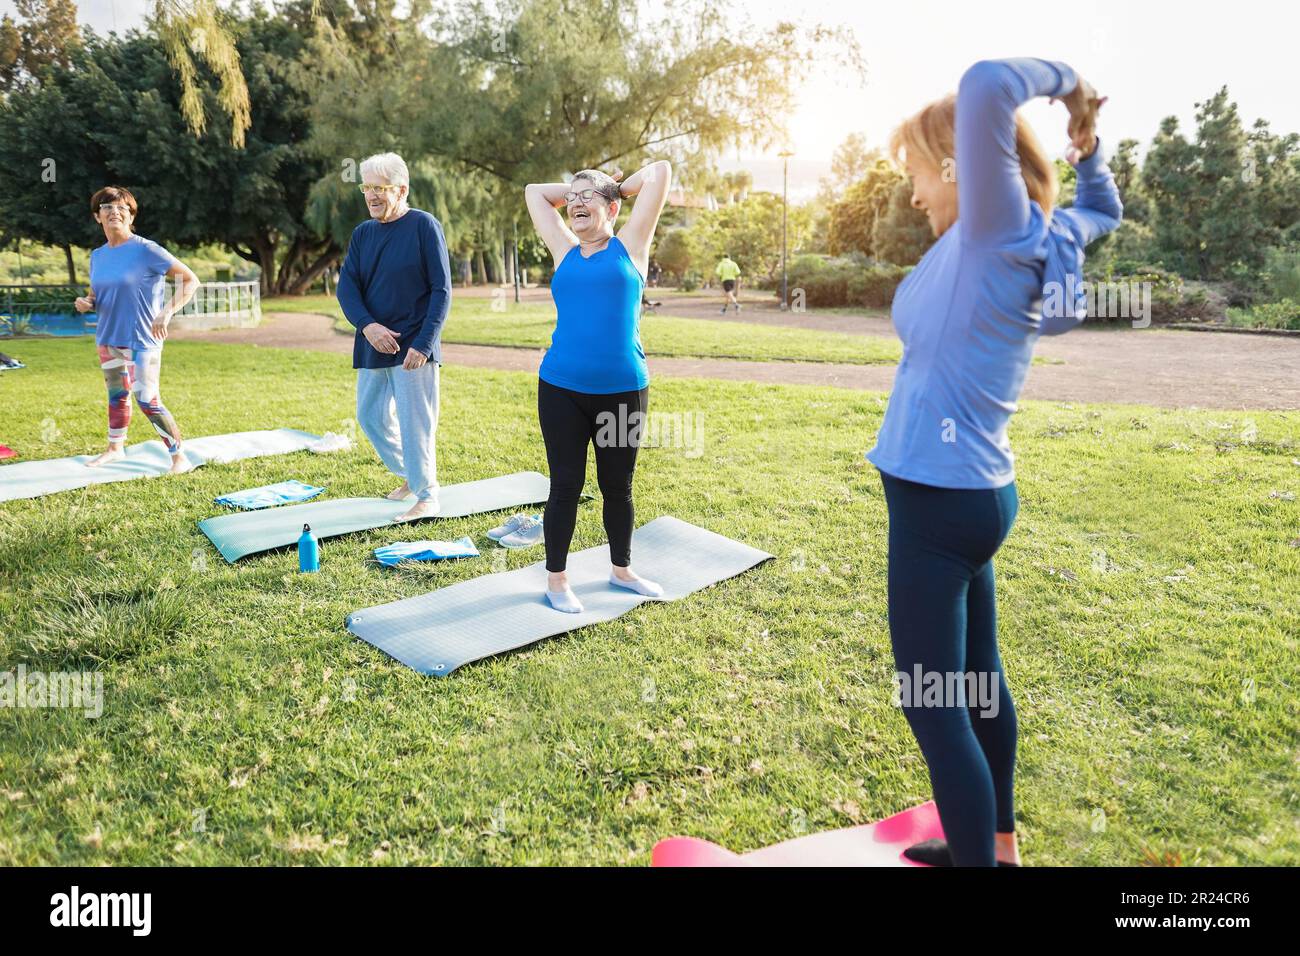 Multiracial senior people doing workout exercises outdoor with city park in background - Healthy lifestyle and joyful elderly lifestyle concept - Focu Stock Photo